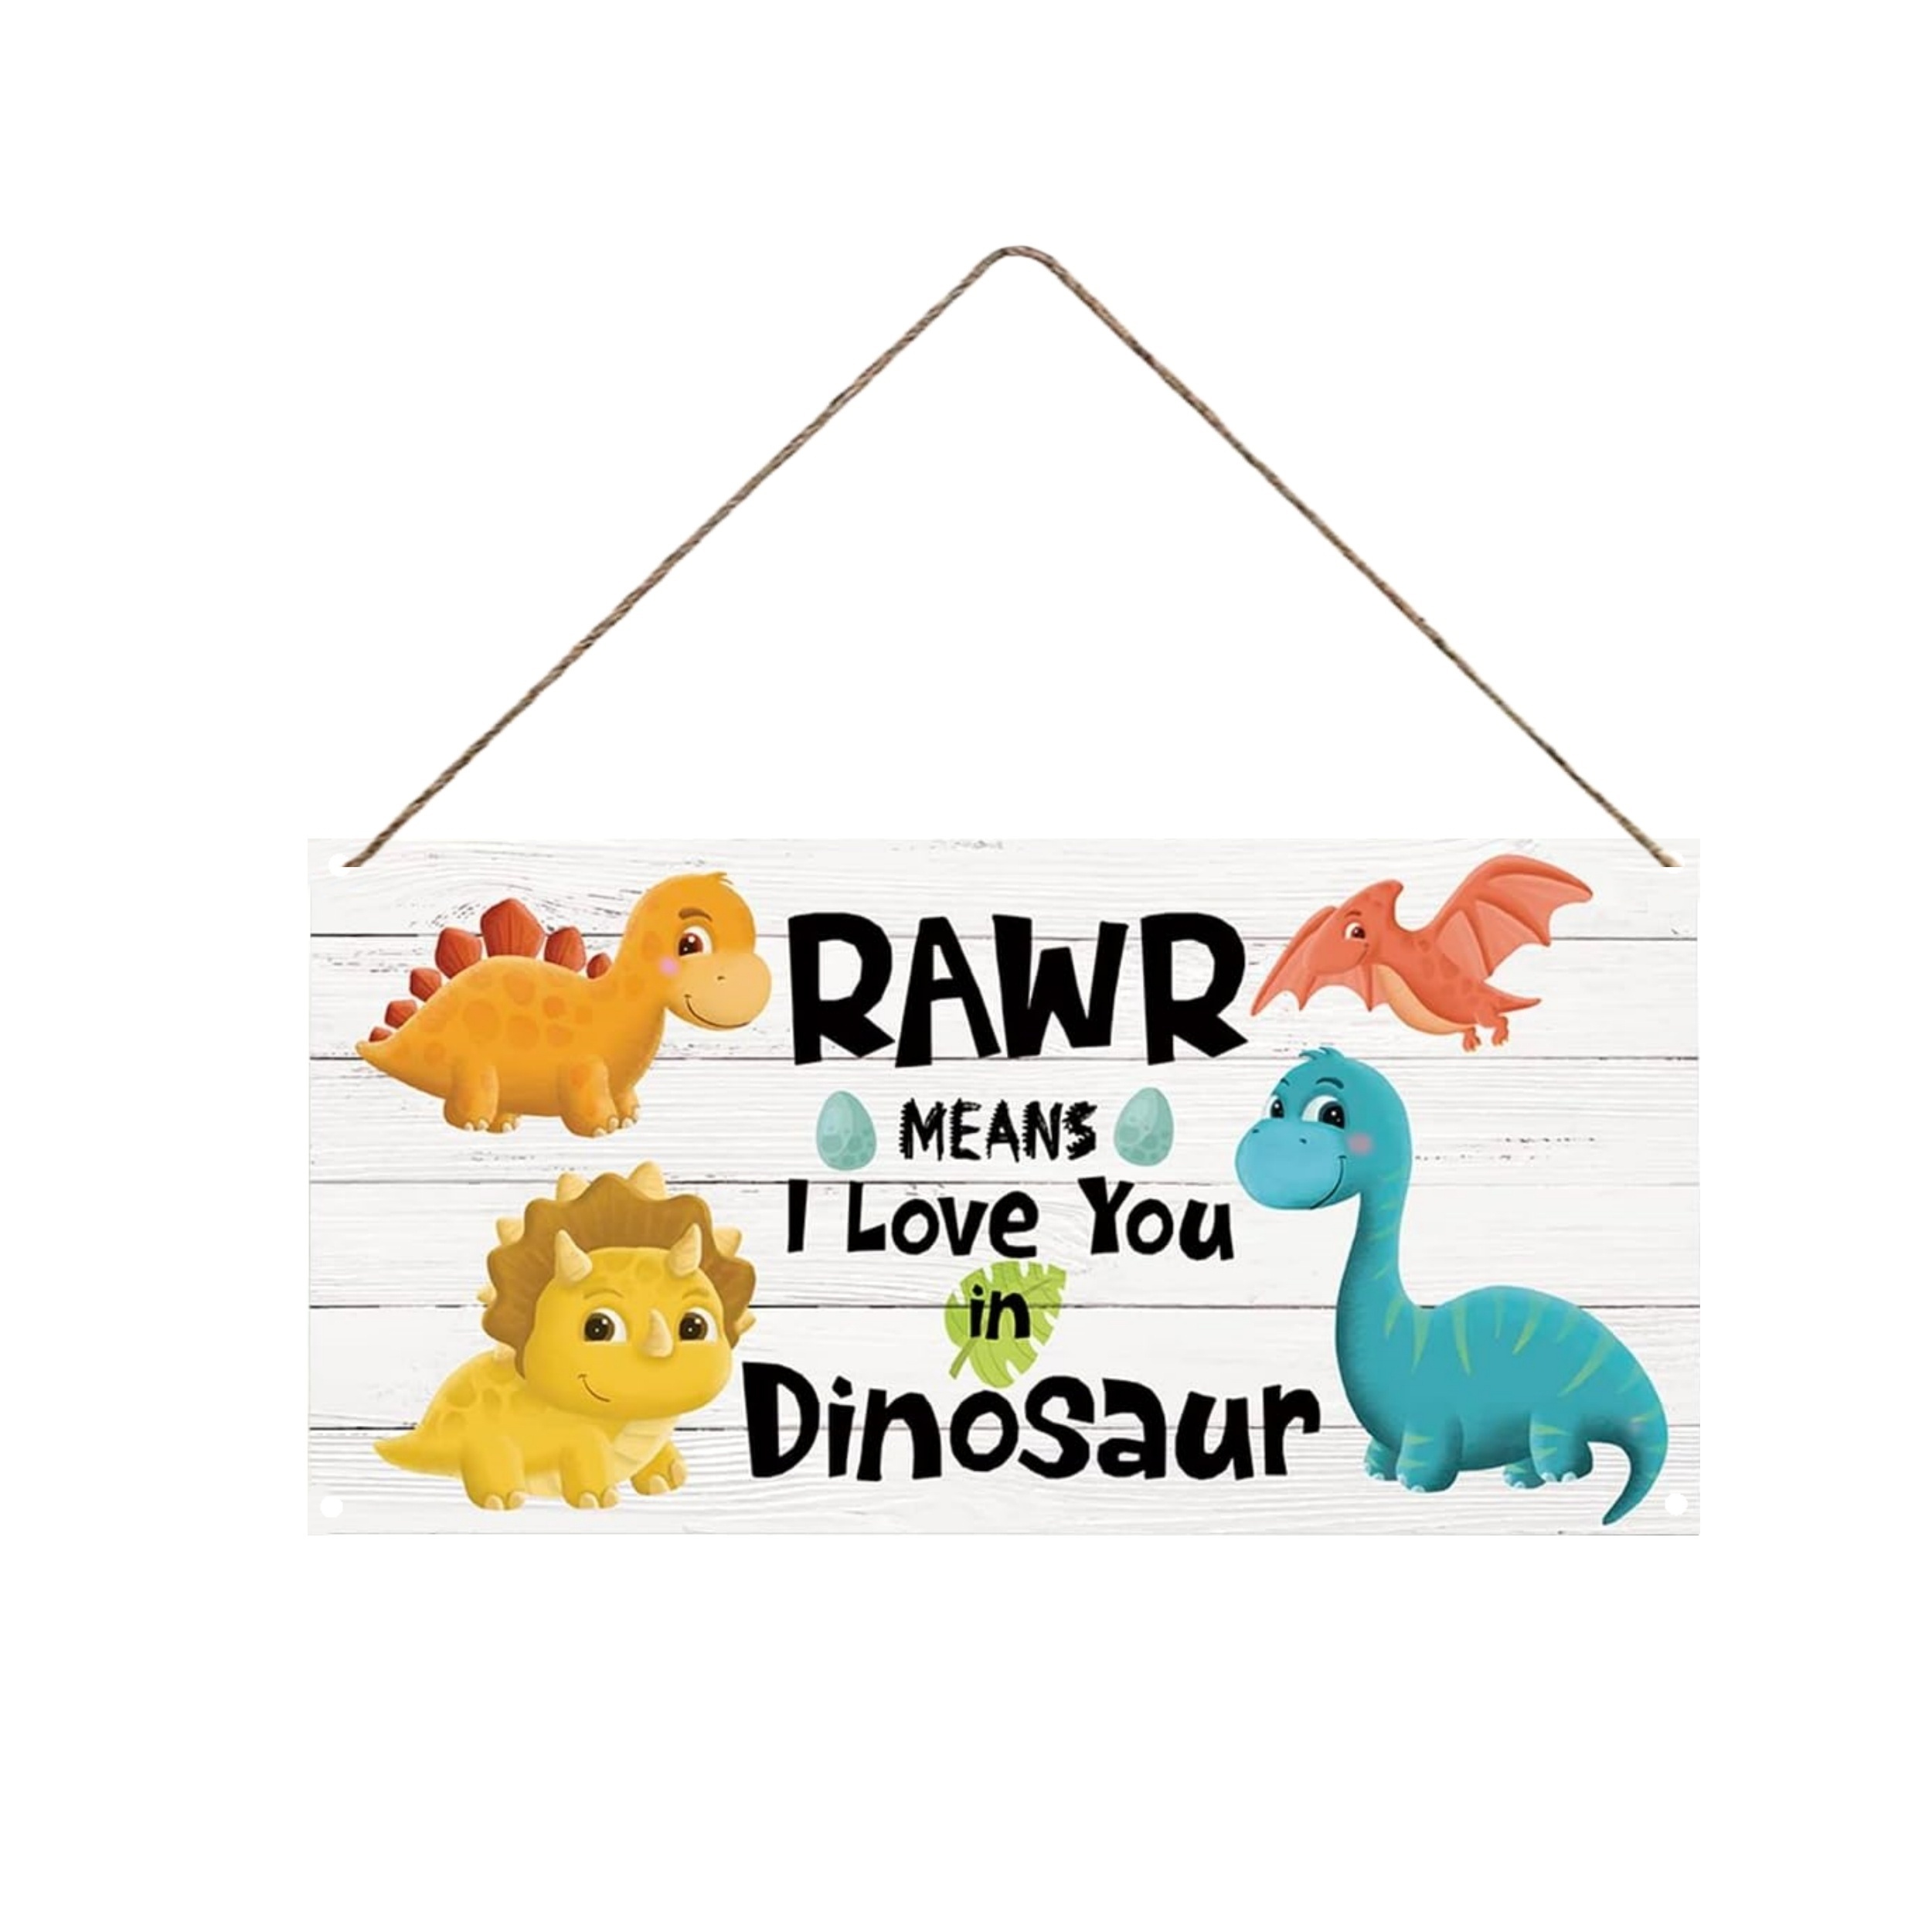 

1pc Rustic Wooden Dinosaur Wall Art Sign, "rawr Means I Love You In Dinosaur", Funny Vintage Home Decor With Rope For Nursery, Playroom, 7.87x3.94 Inches